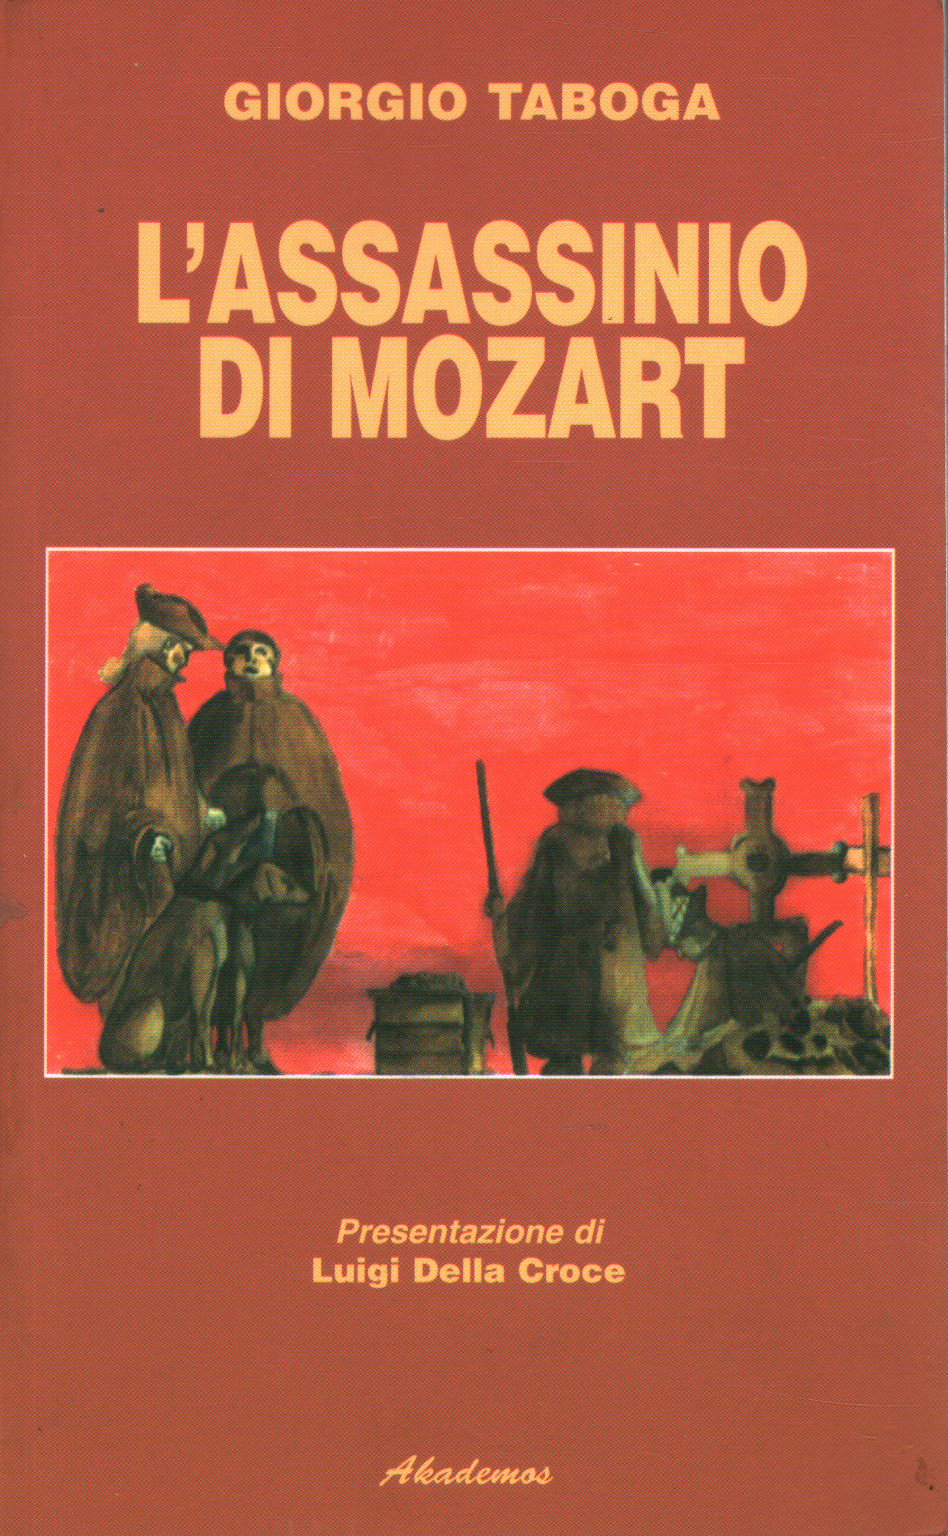 The assassination of Mozart